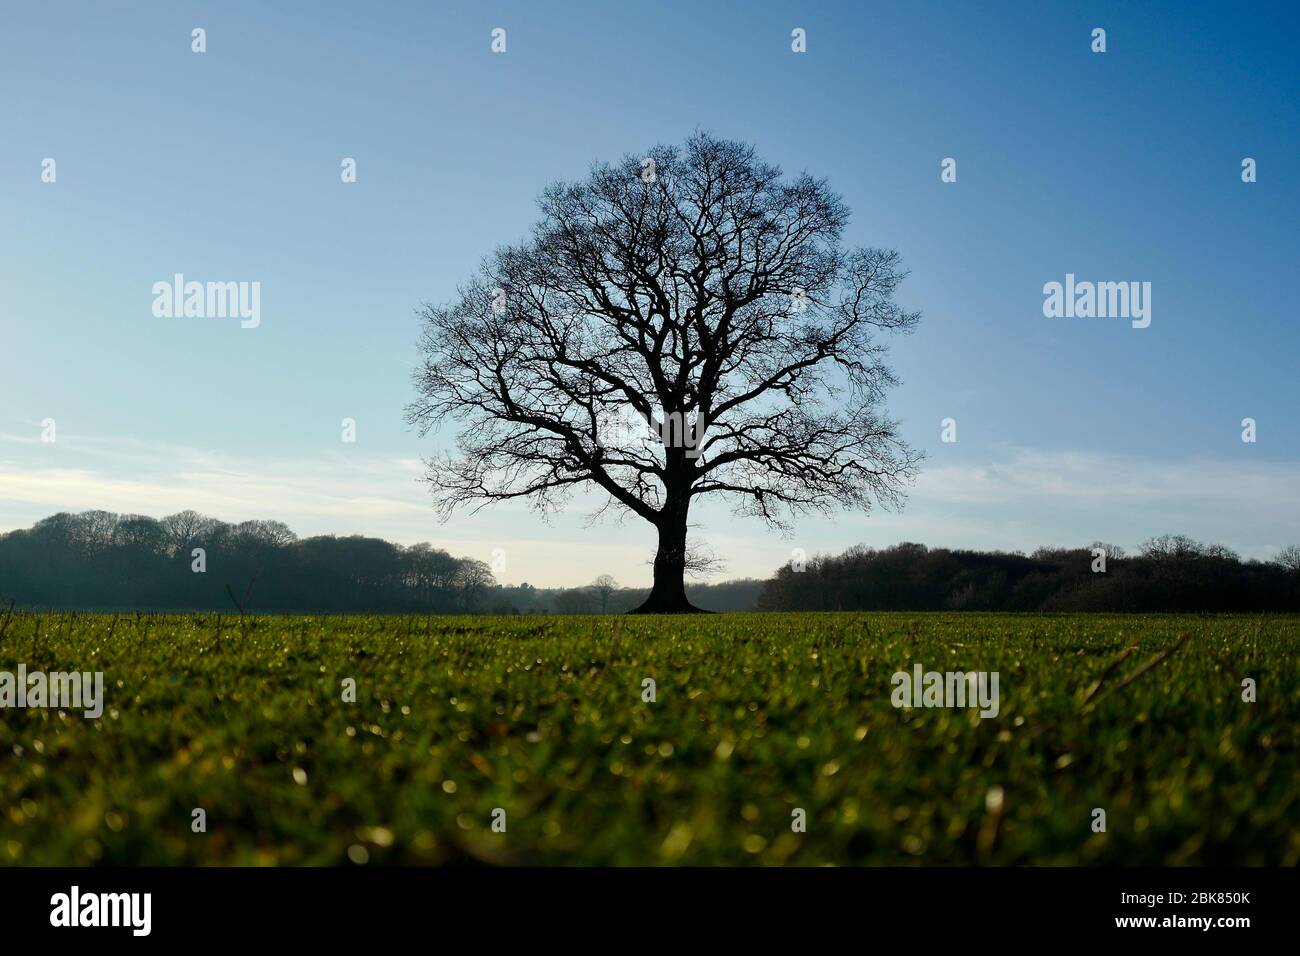 A silhouette of a single tree in the middle of a field Stock Photo